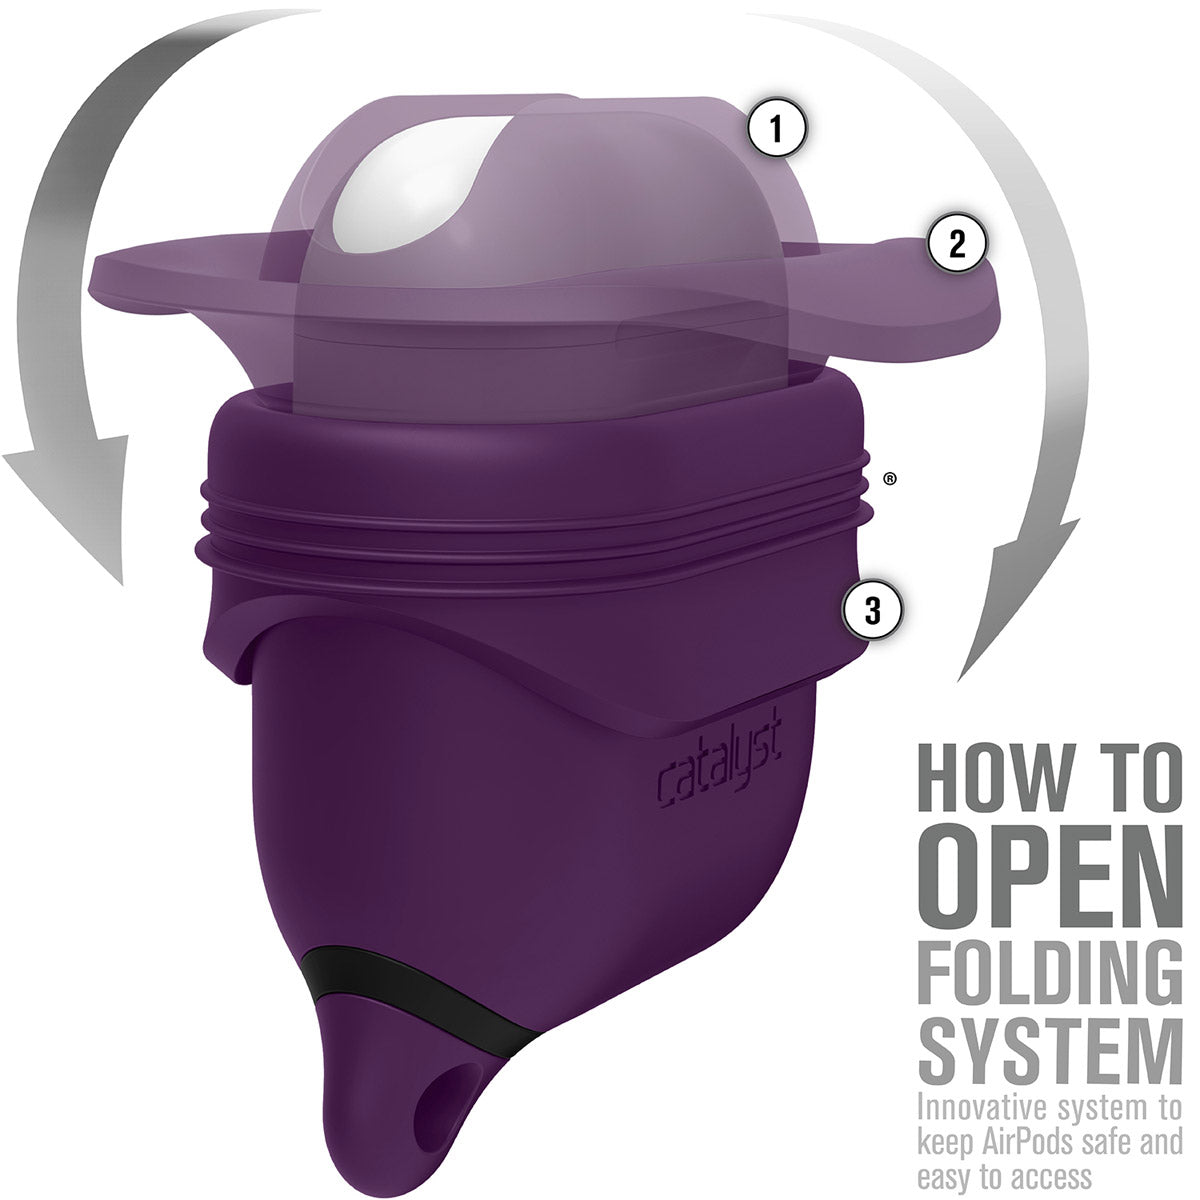 CATAPDPPL | Catalyst airpods gen2/1 waterproof case + carabiner showing the-foldable silicone in deep plum text reads how to open folding system innovative system to keep airpods safe and easy to access